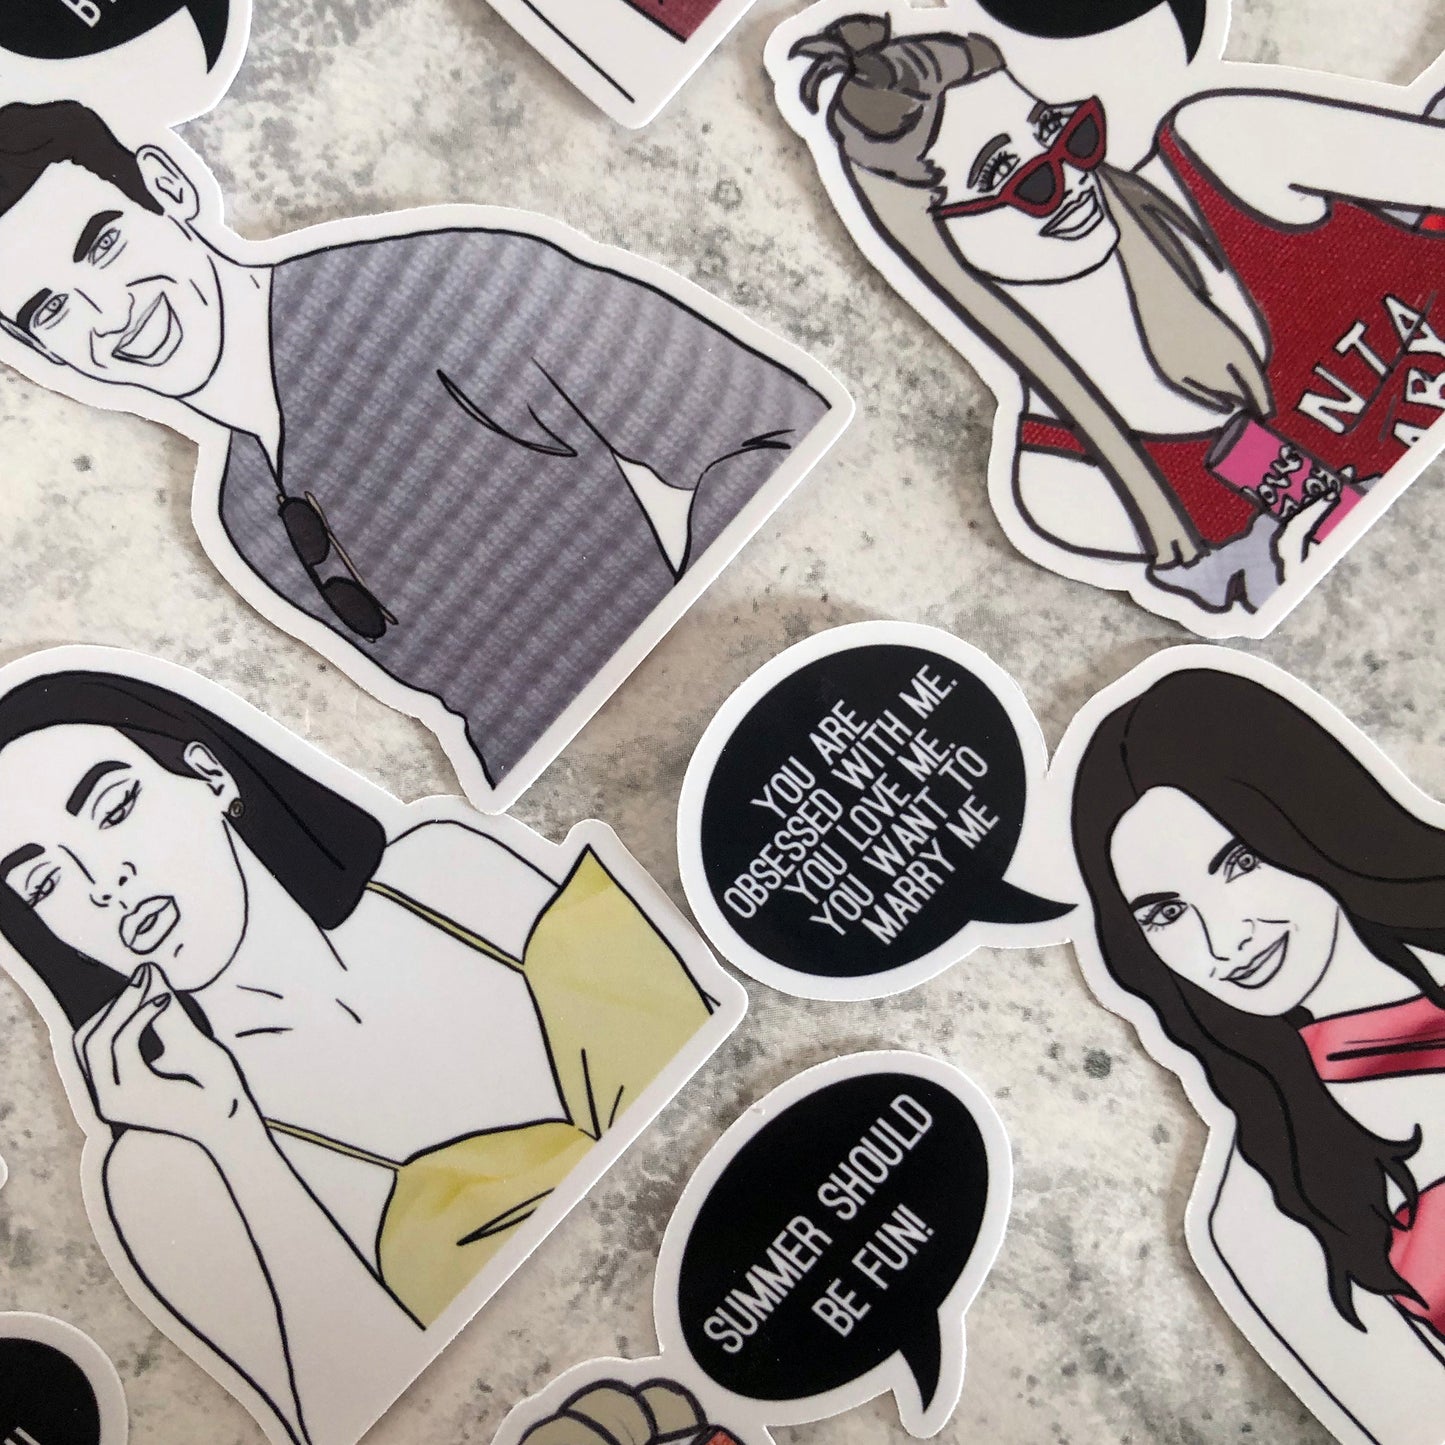 Image shows a collection of stickers inspired by reality tv show Summer House